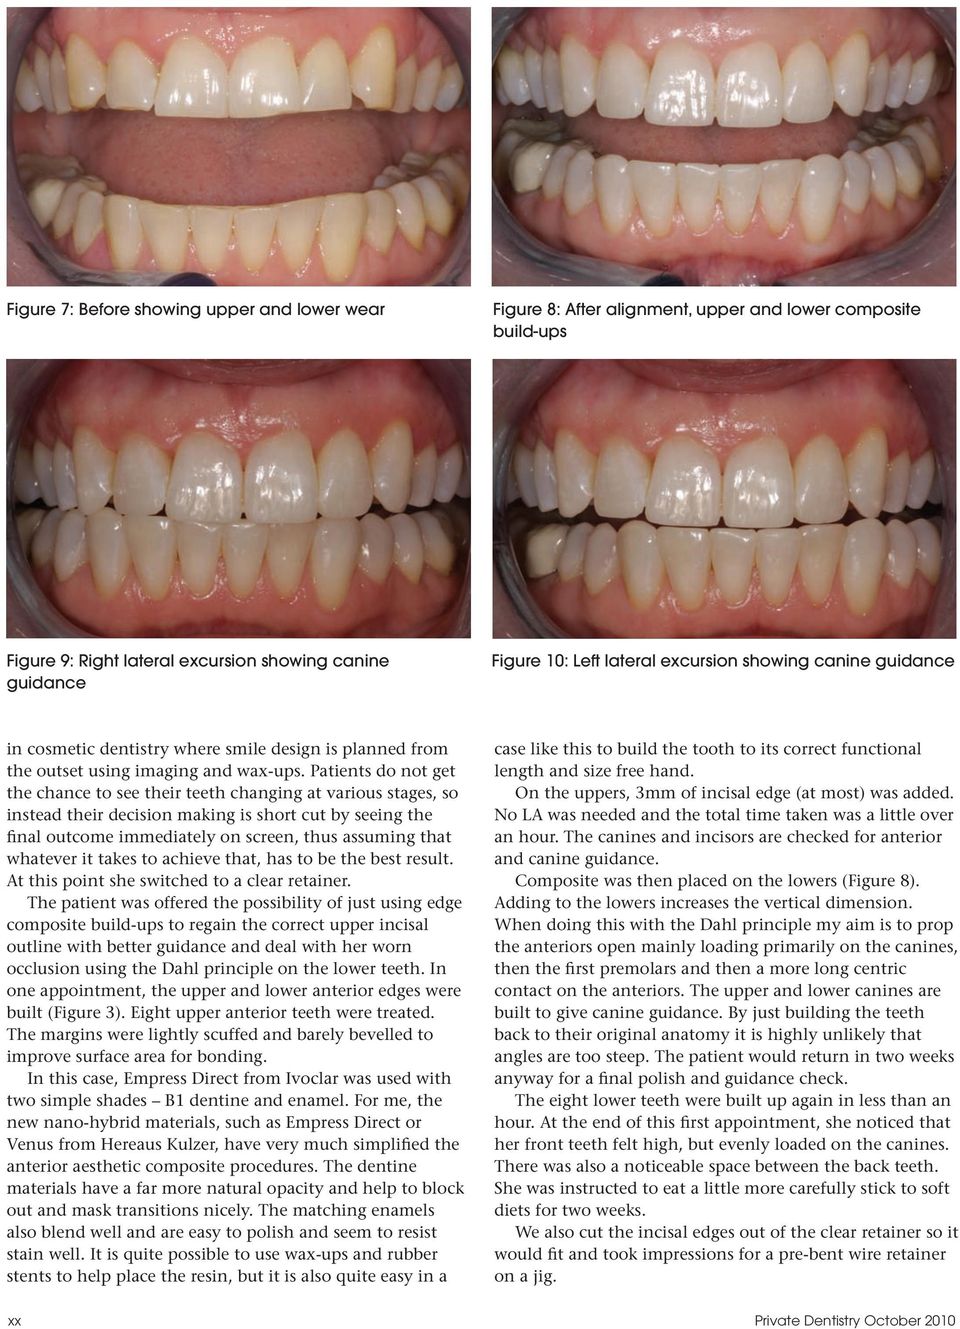 Patients do not get the chance to see their teeth changing at various stages, so instead their decision making is short cut by seeing the final outcome immediately on screen, thus assuming that